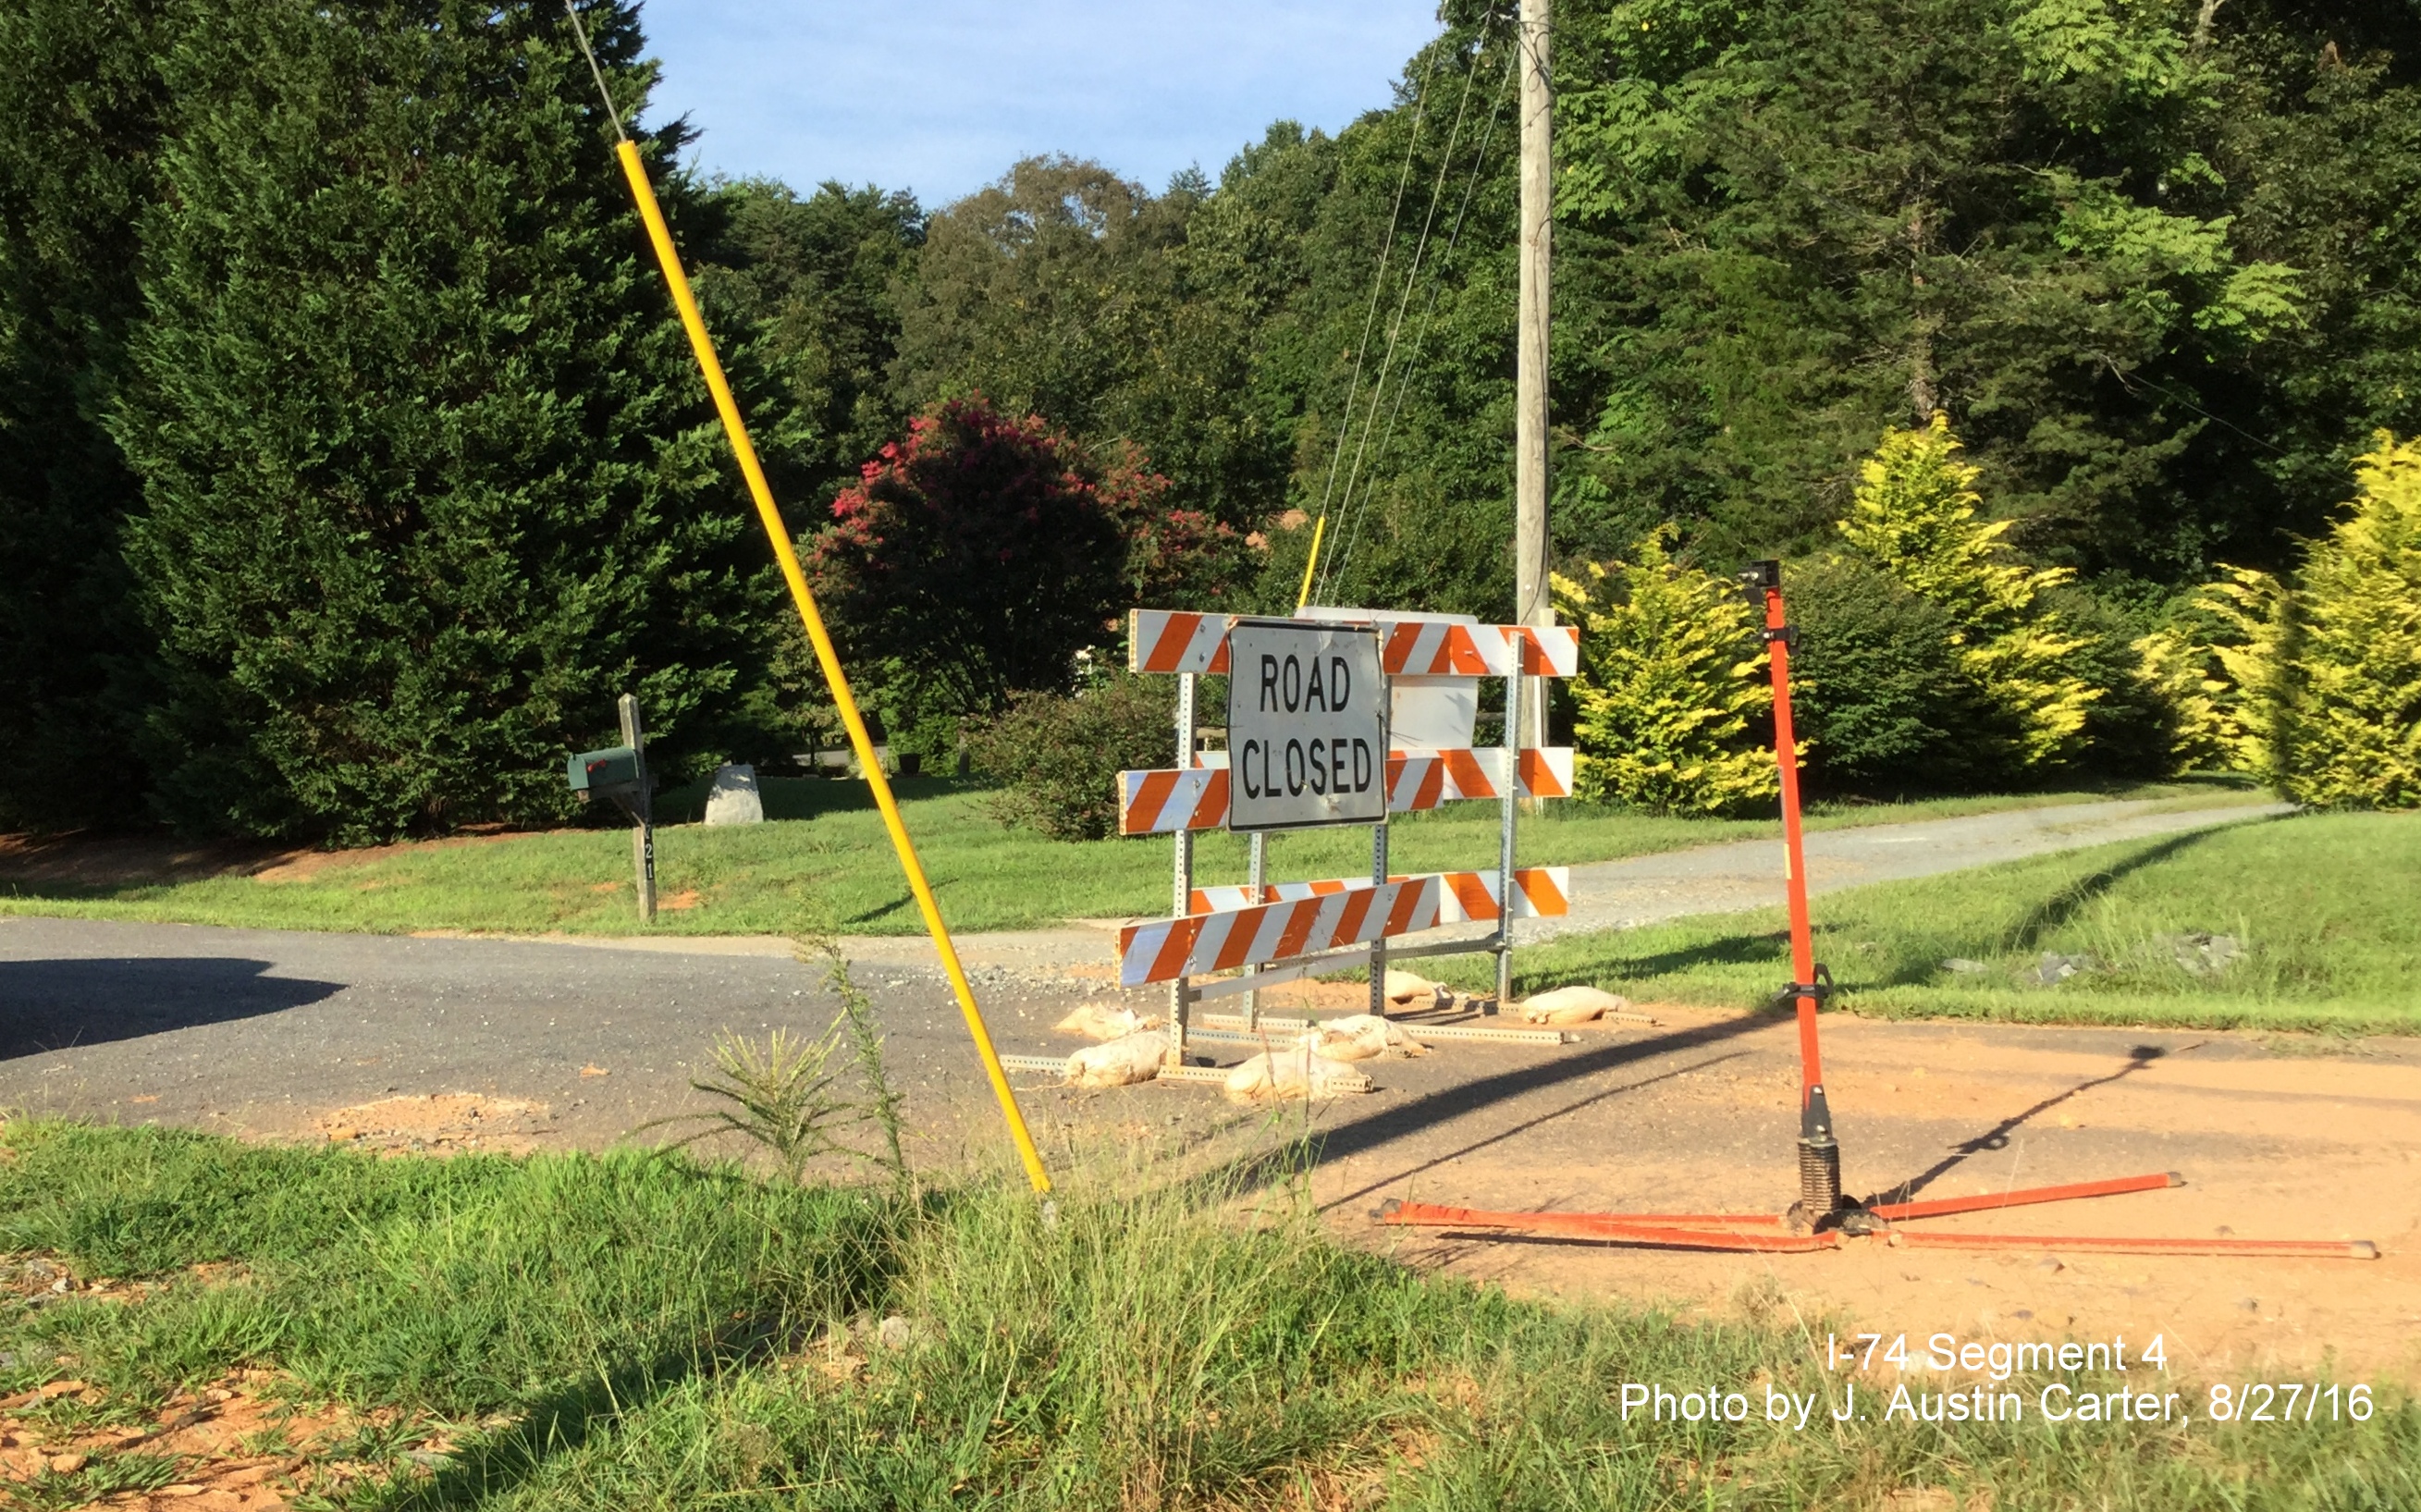 Image of road closed barrier placed on residential street due to construction of Winston-Salem Northern Beltway, by J. Austin Carter